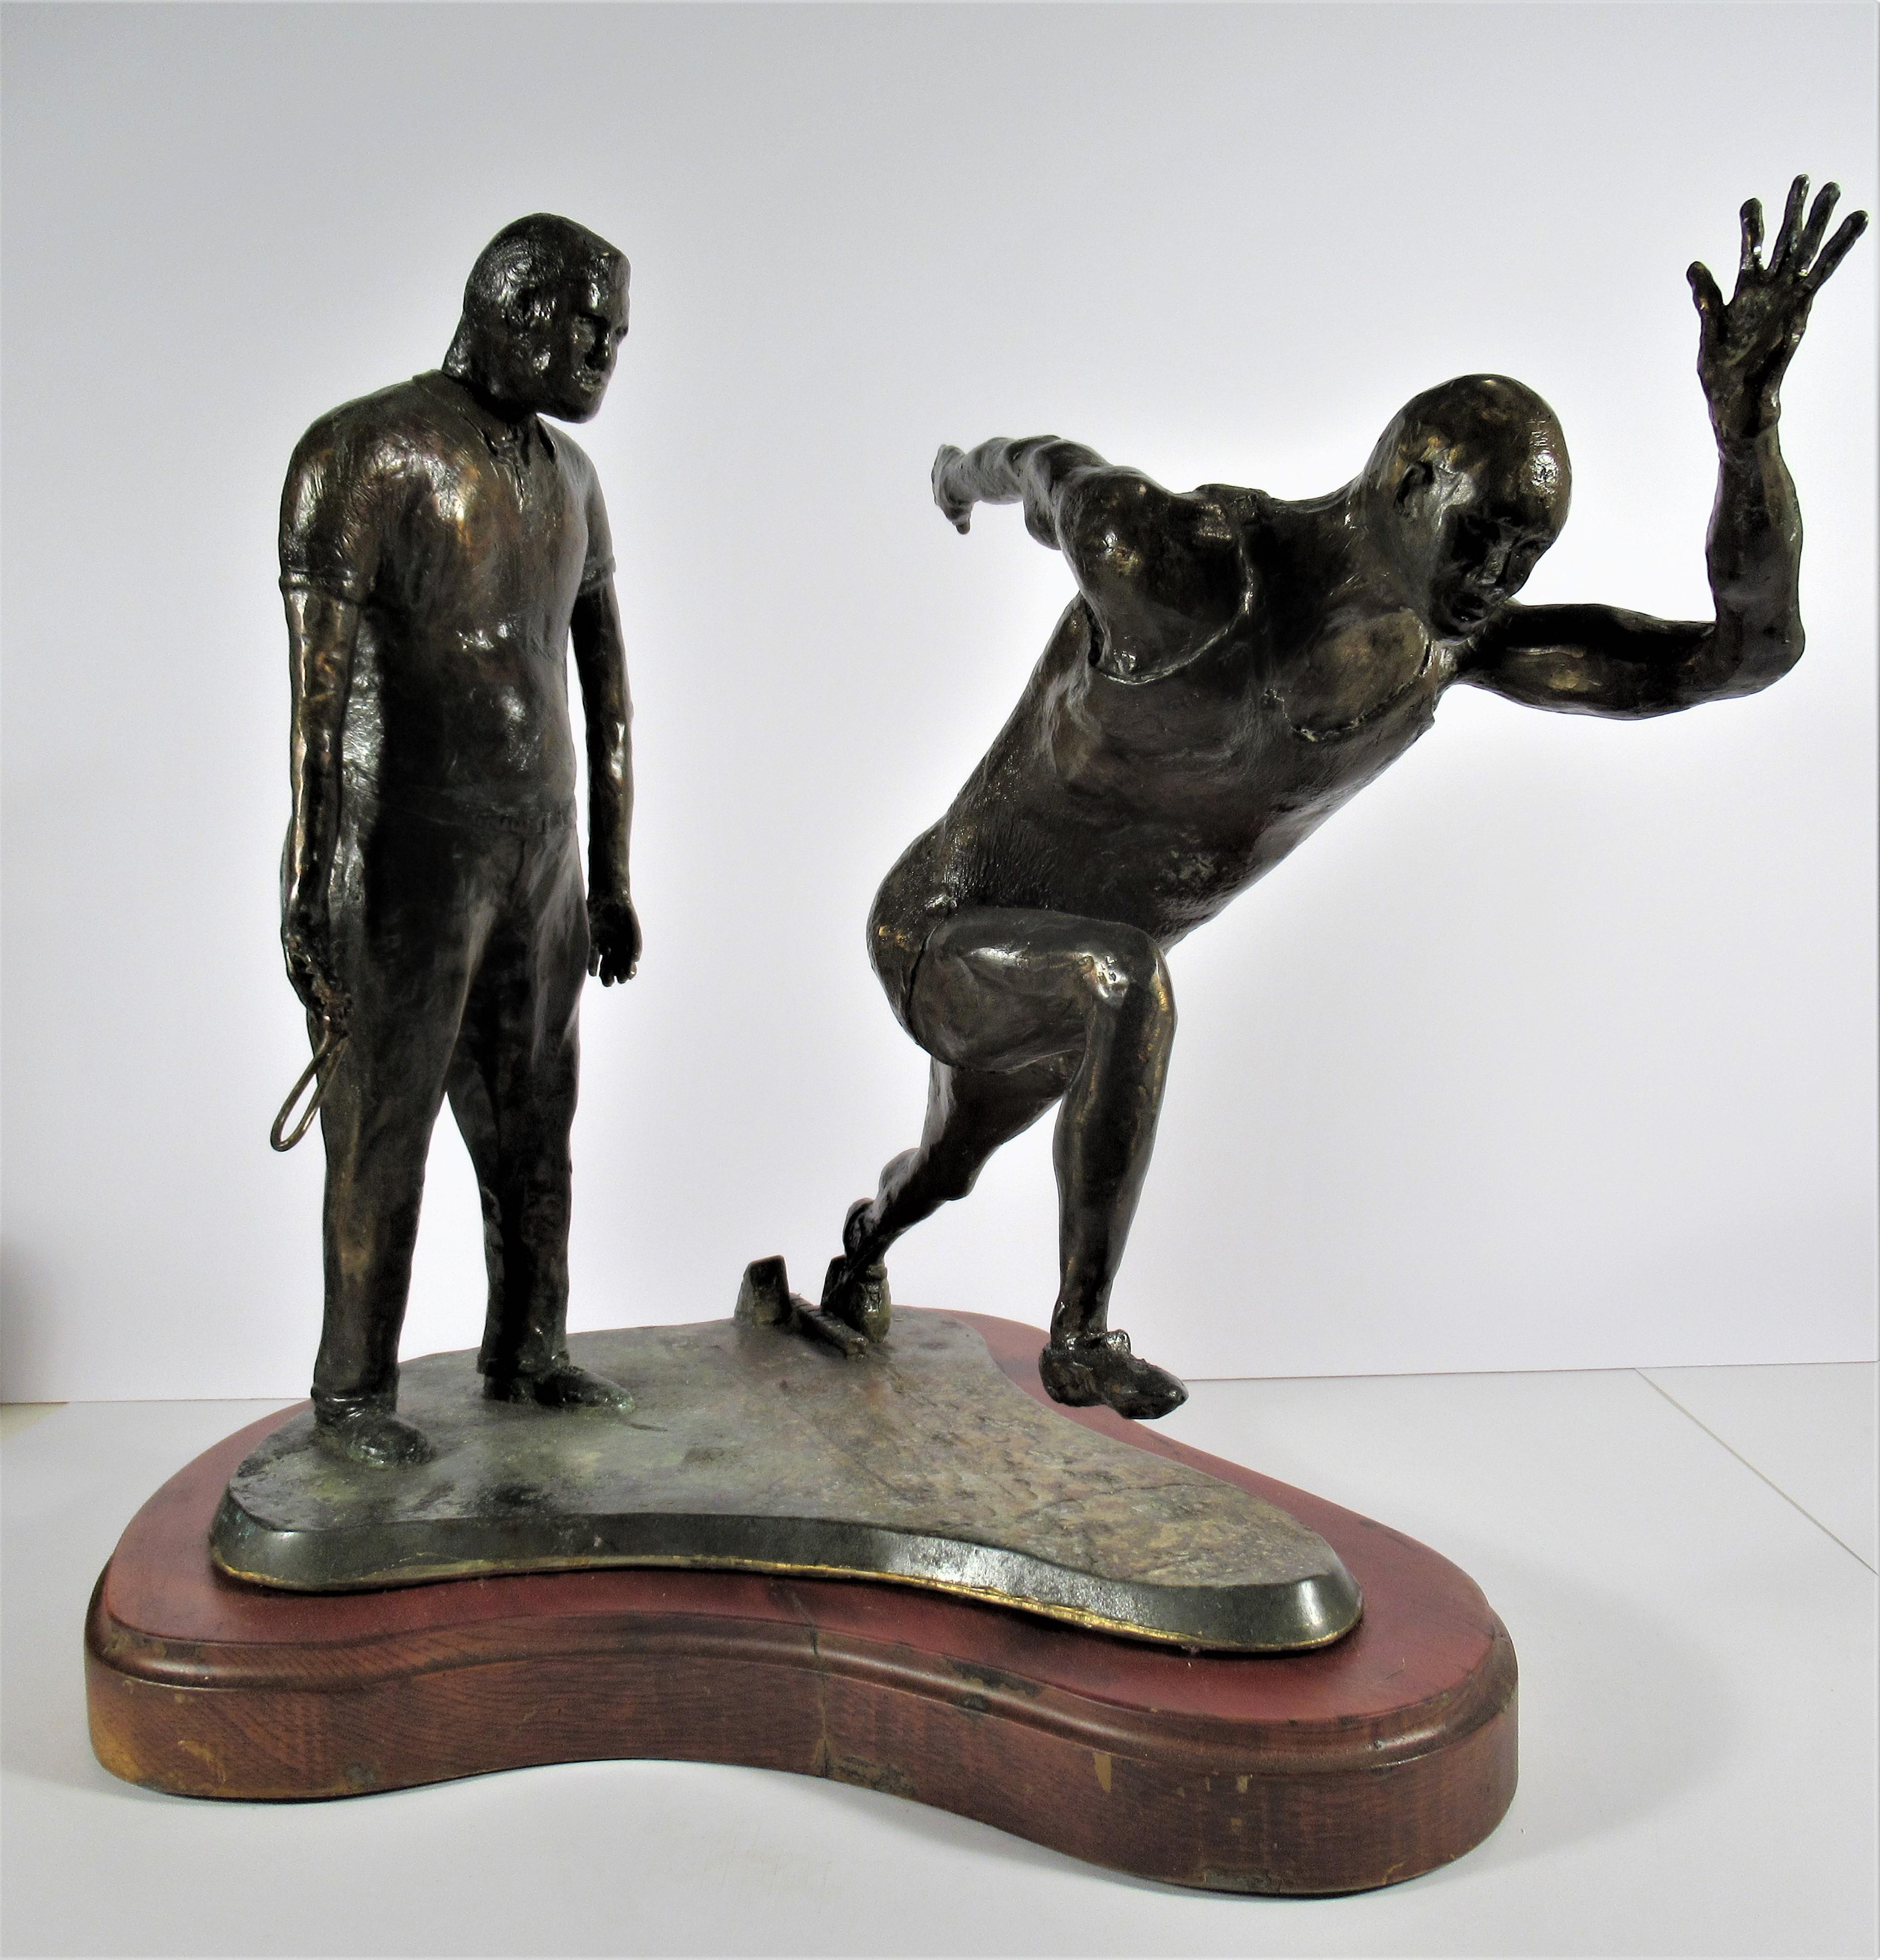 The Athlete and his Coach - Sculpture by Kenneth Johnson